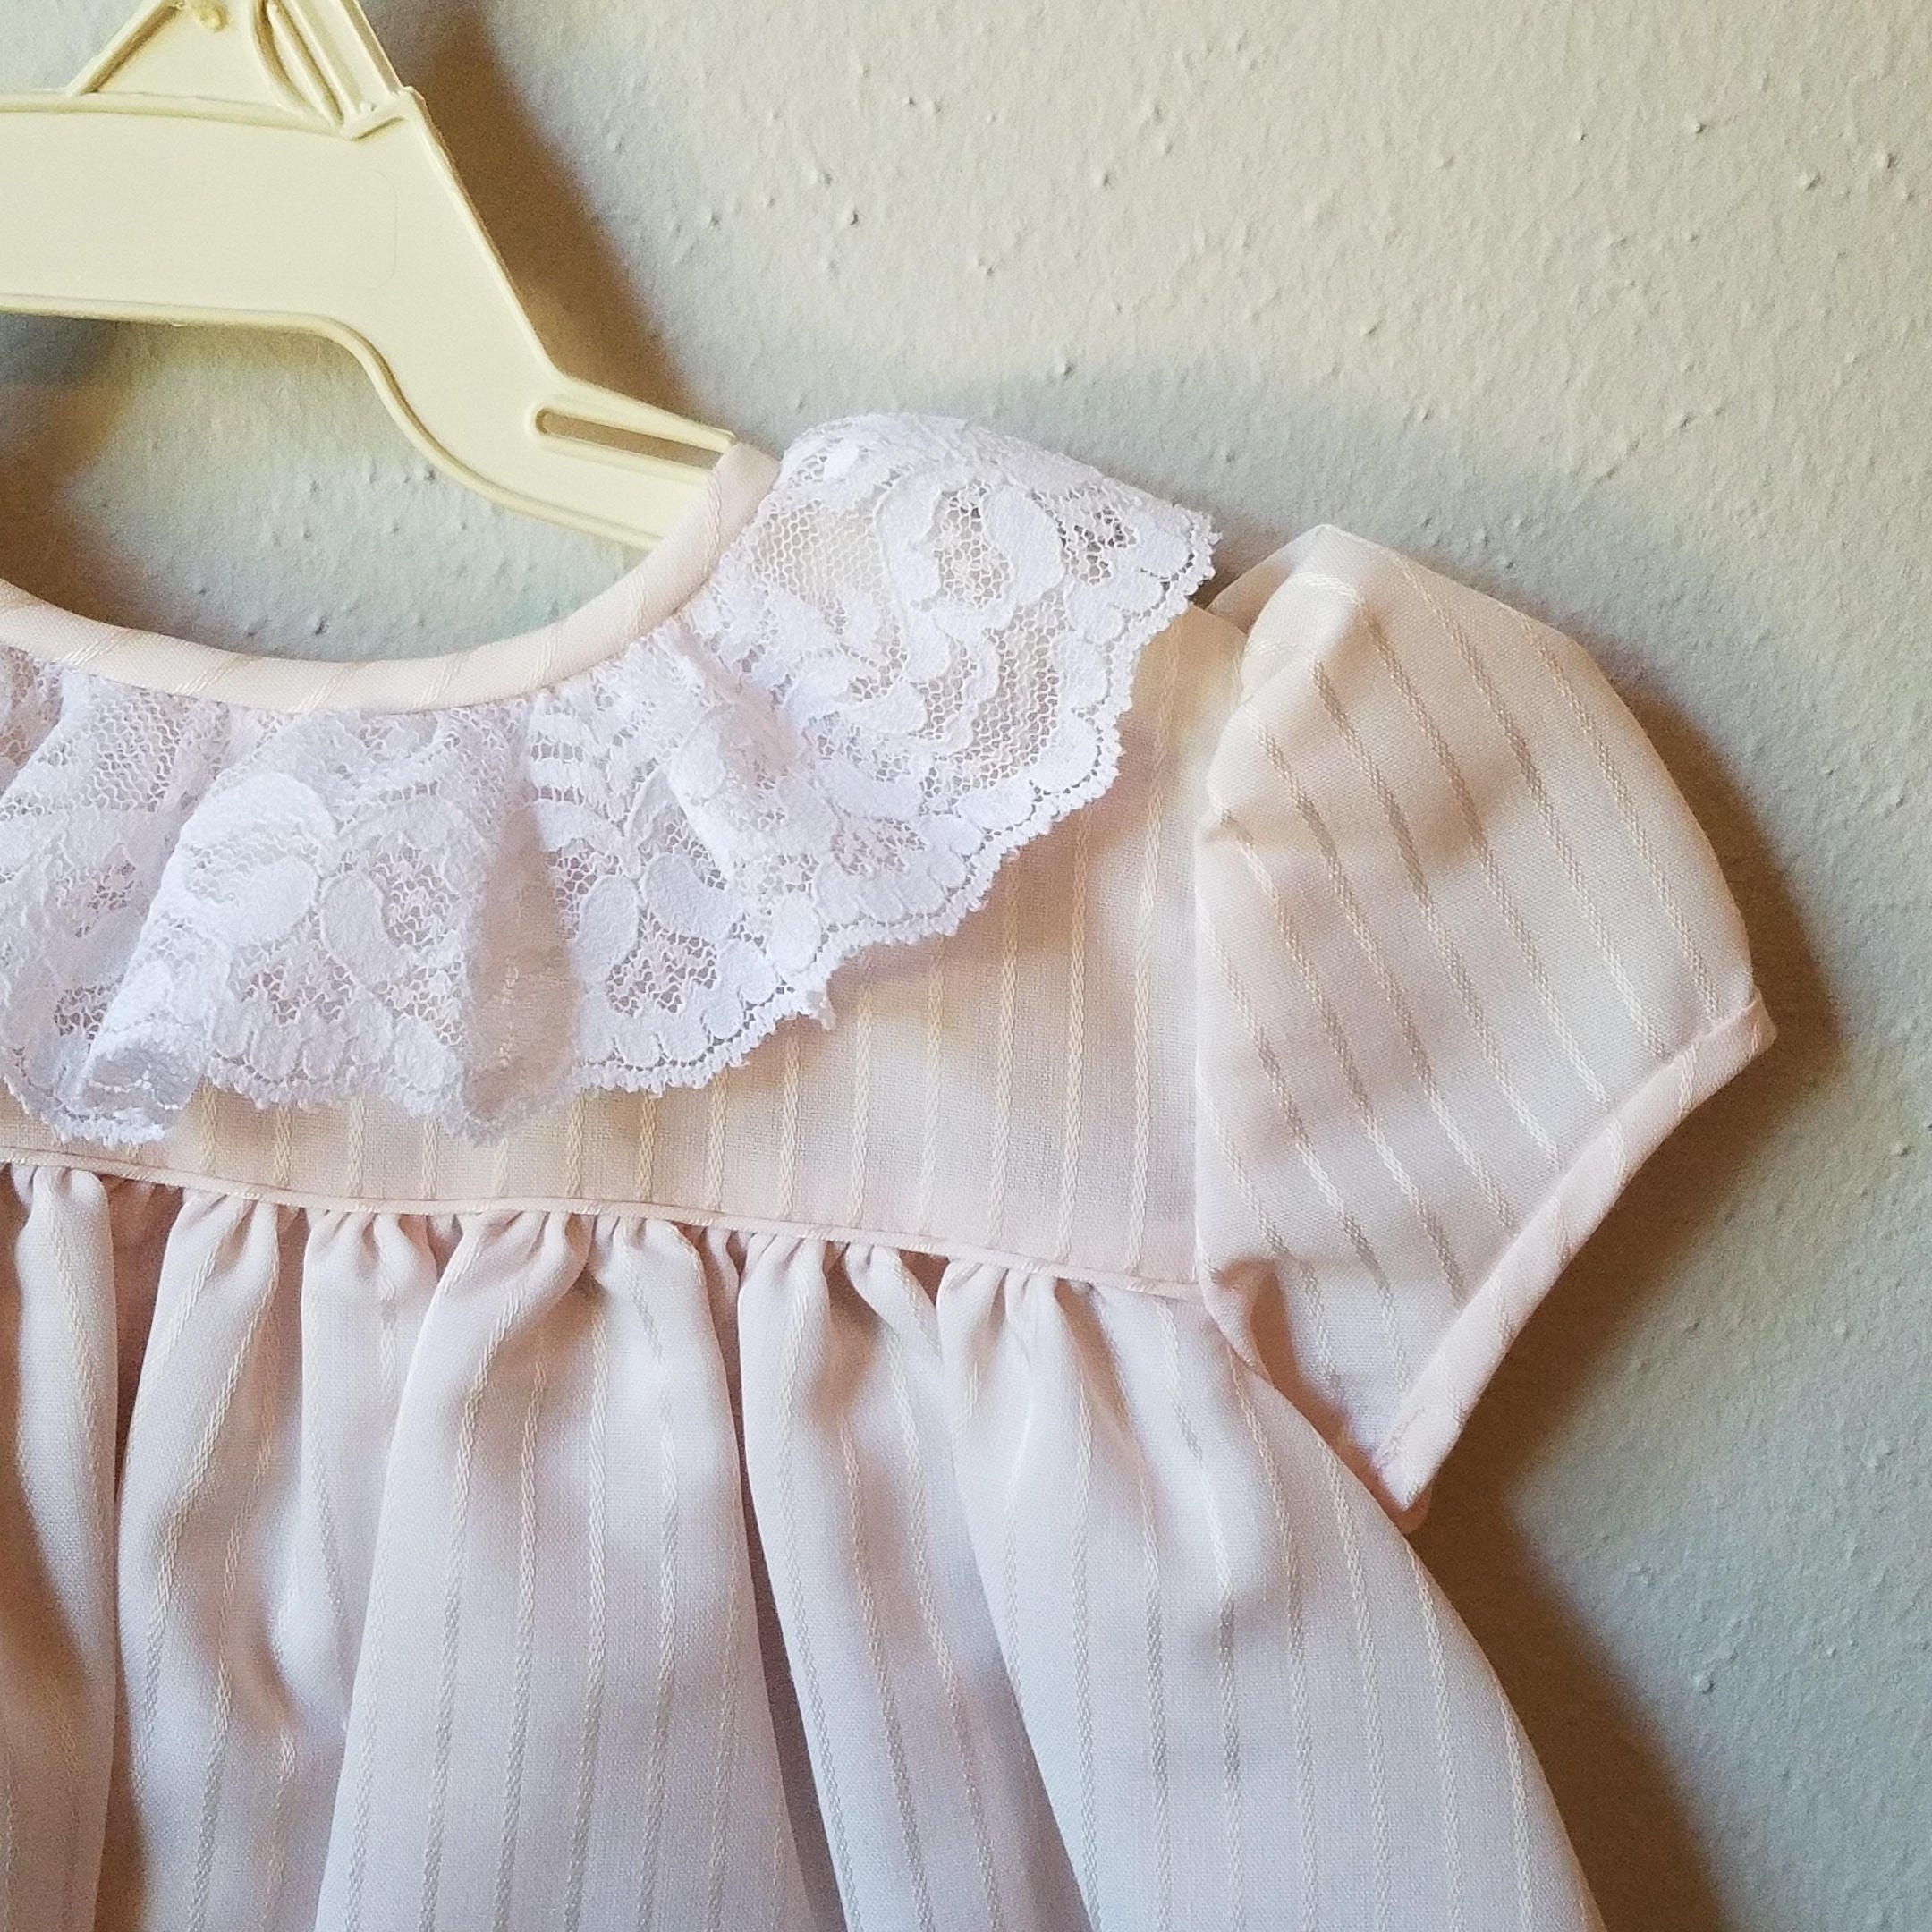 Vintage Girls Pink Dress With White Lace Ruffle Collar and Bow | Etsy